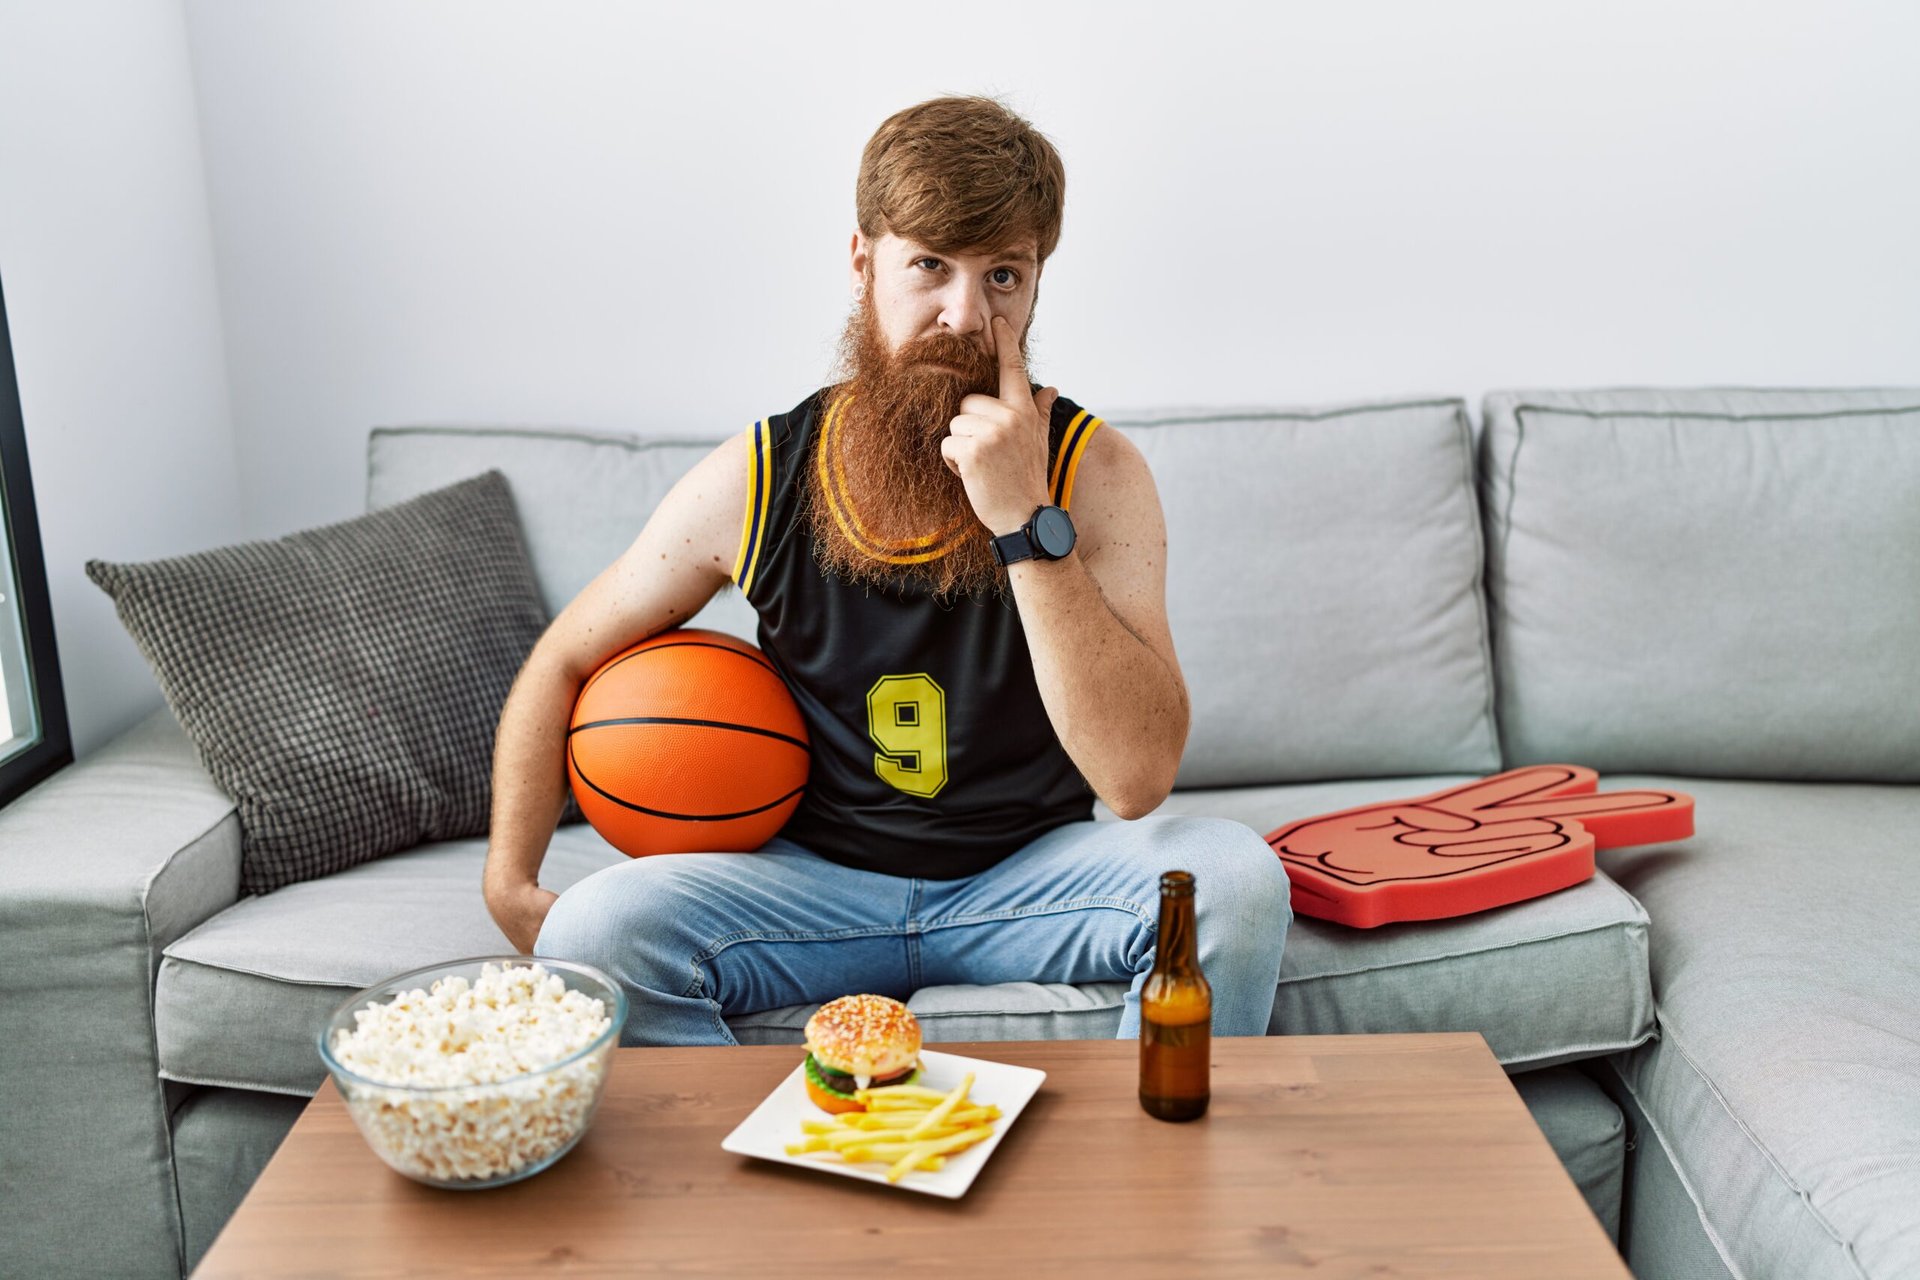 Bearded man holding a basketball watching TV with popcorn and a cheeseburger wearing a sports jersey and a watch sitting on a couch and making a watchful gesture